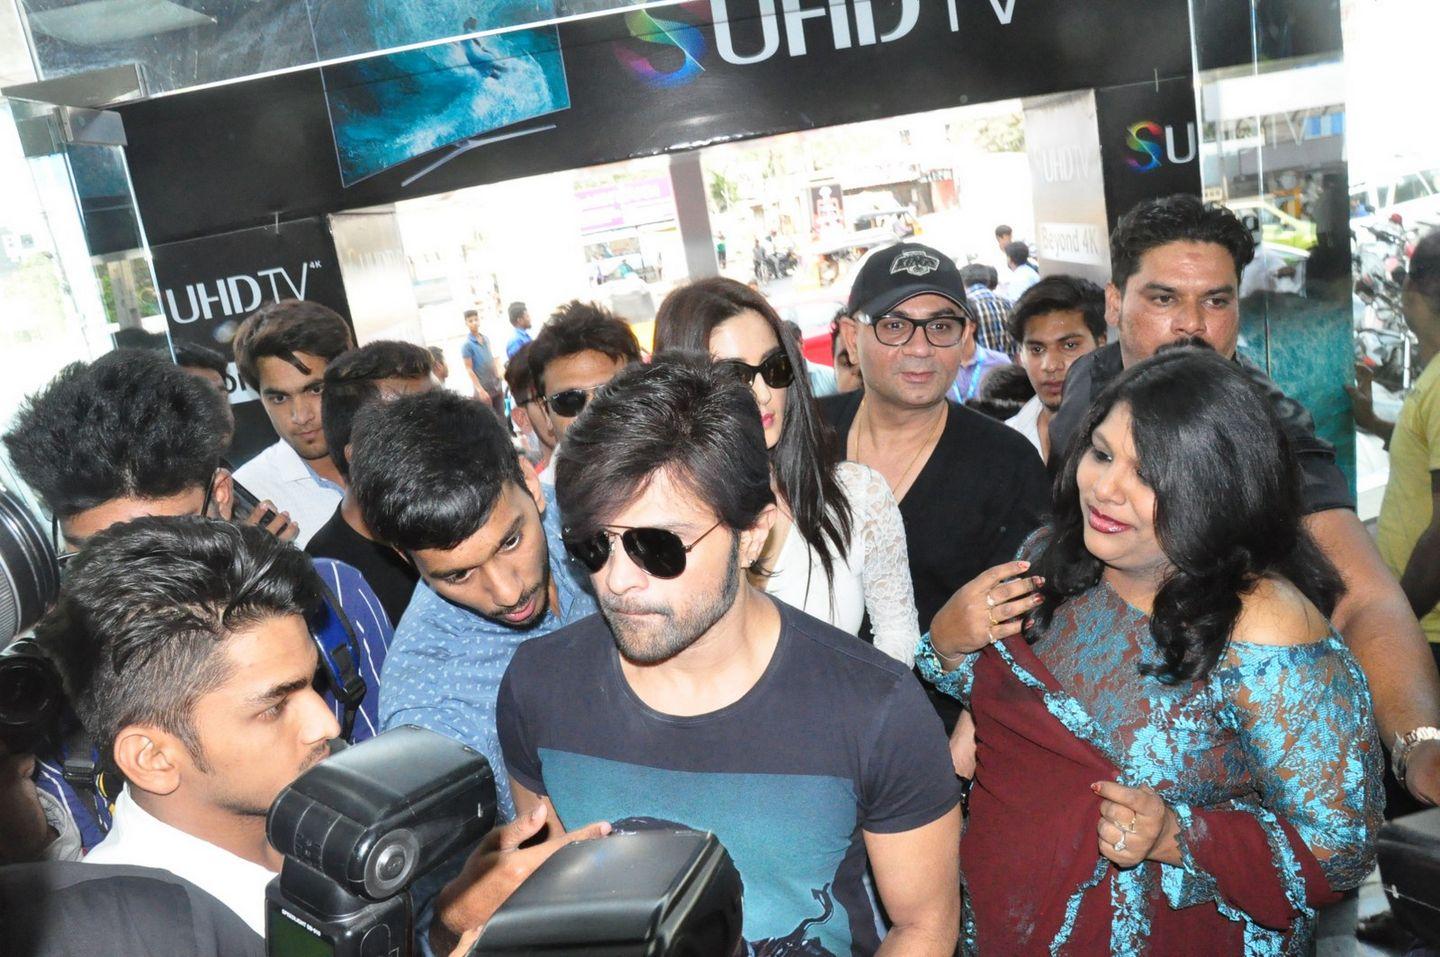 Teraa Suroor 2 Promotion at Yes Mart Photos